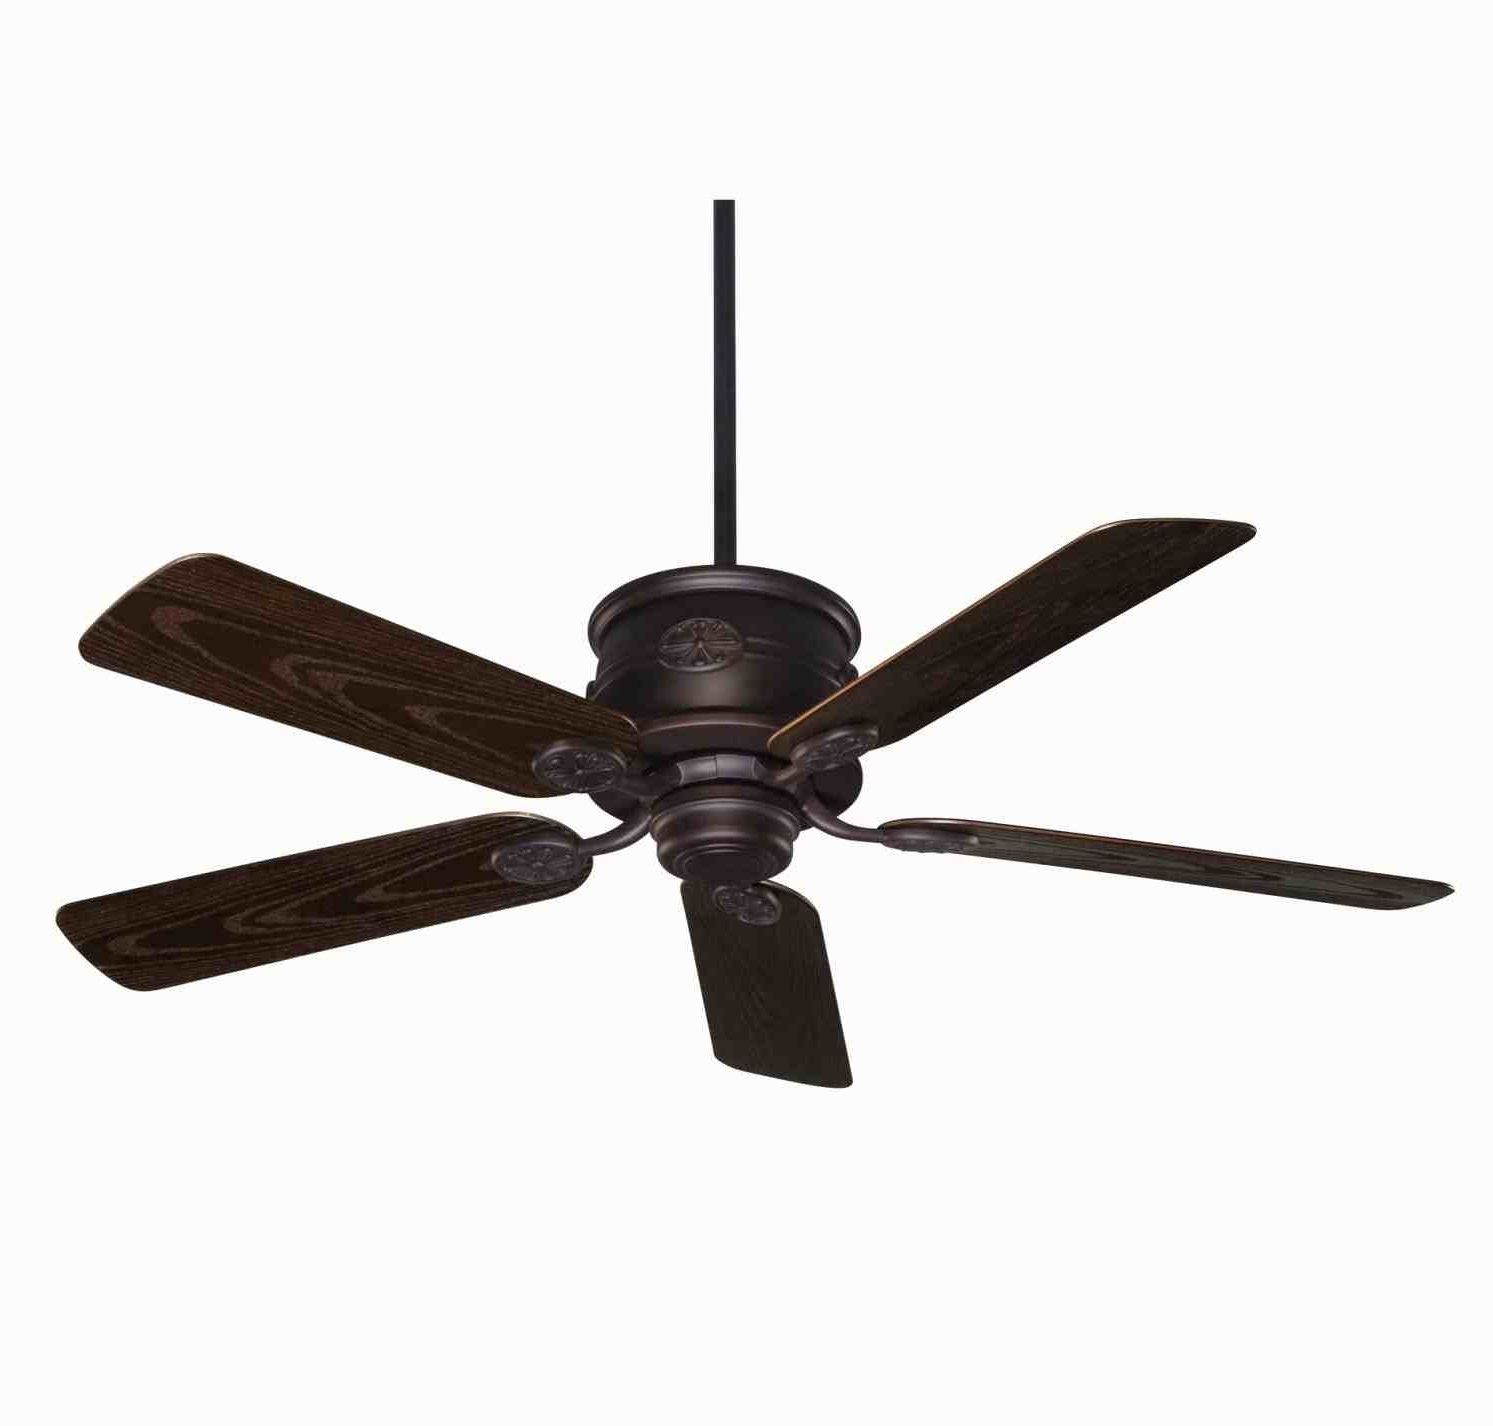 Designing Ideasrhfreshdirectfactscom Craftsman Fan Kit As Throughout Most Current Craftsman Outdoor Ceiling Fans (View 20 of 20)